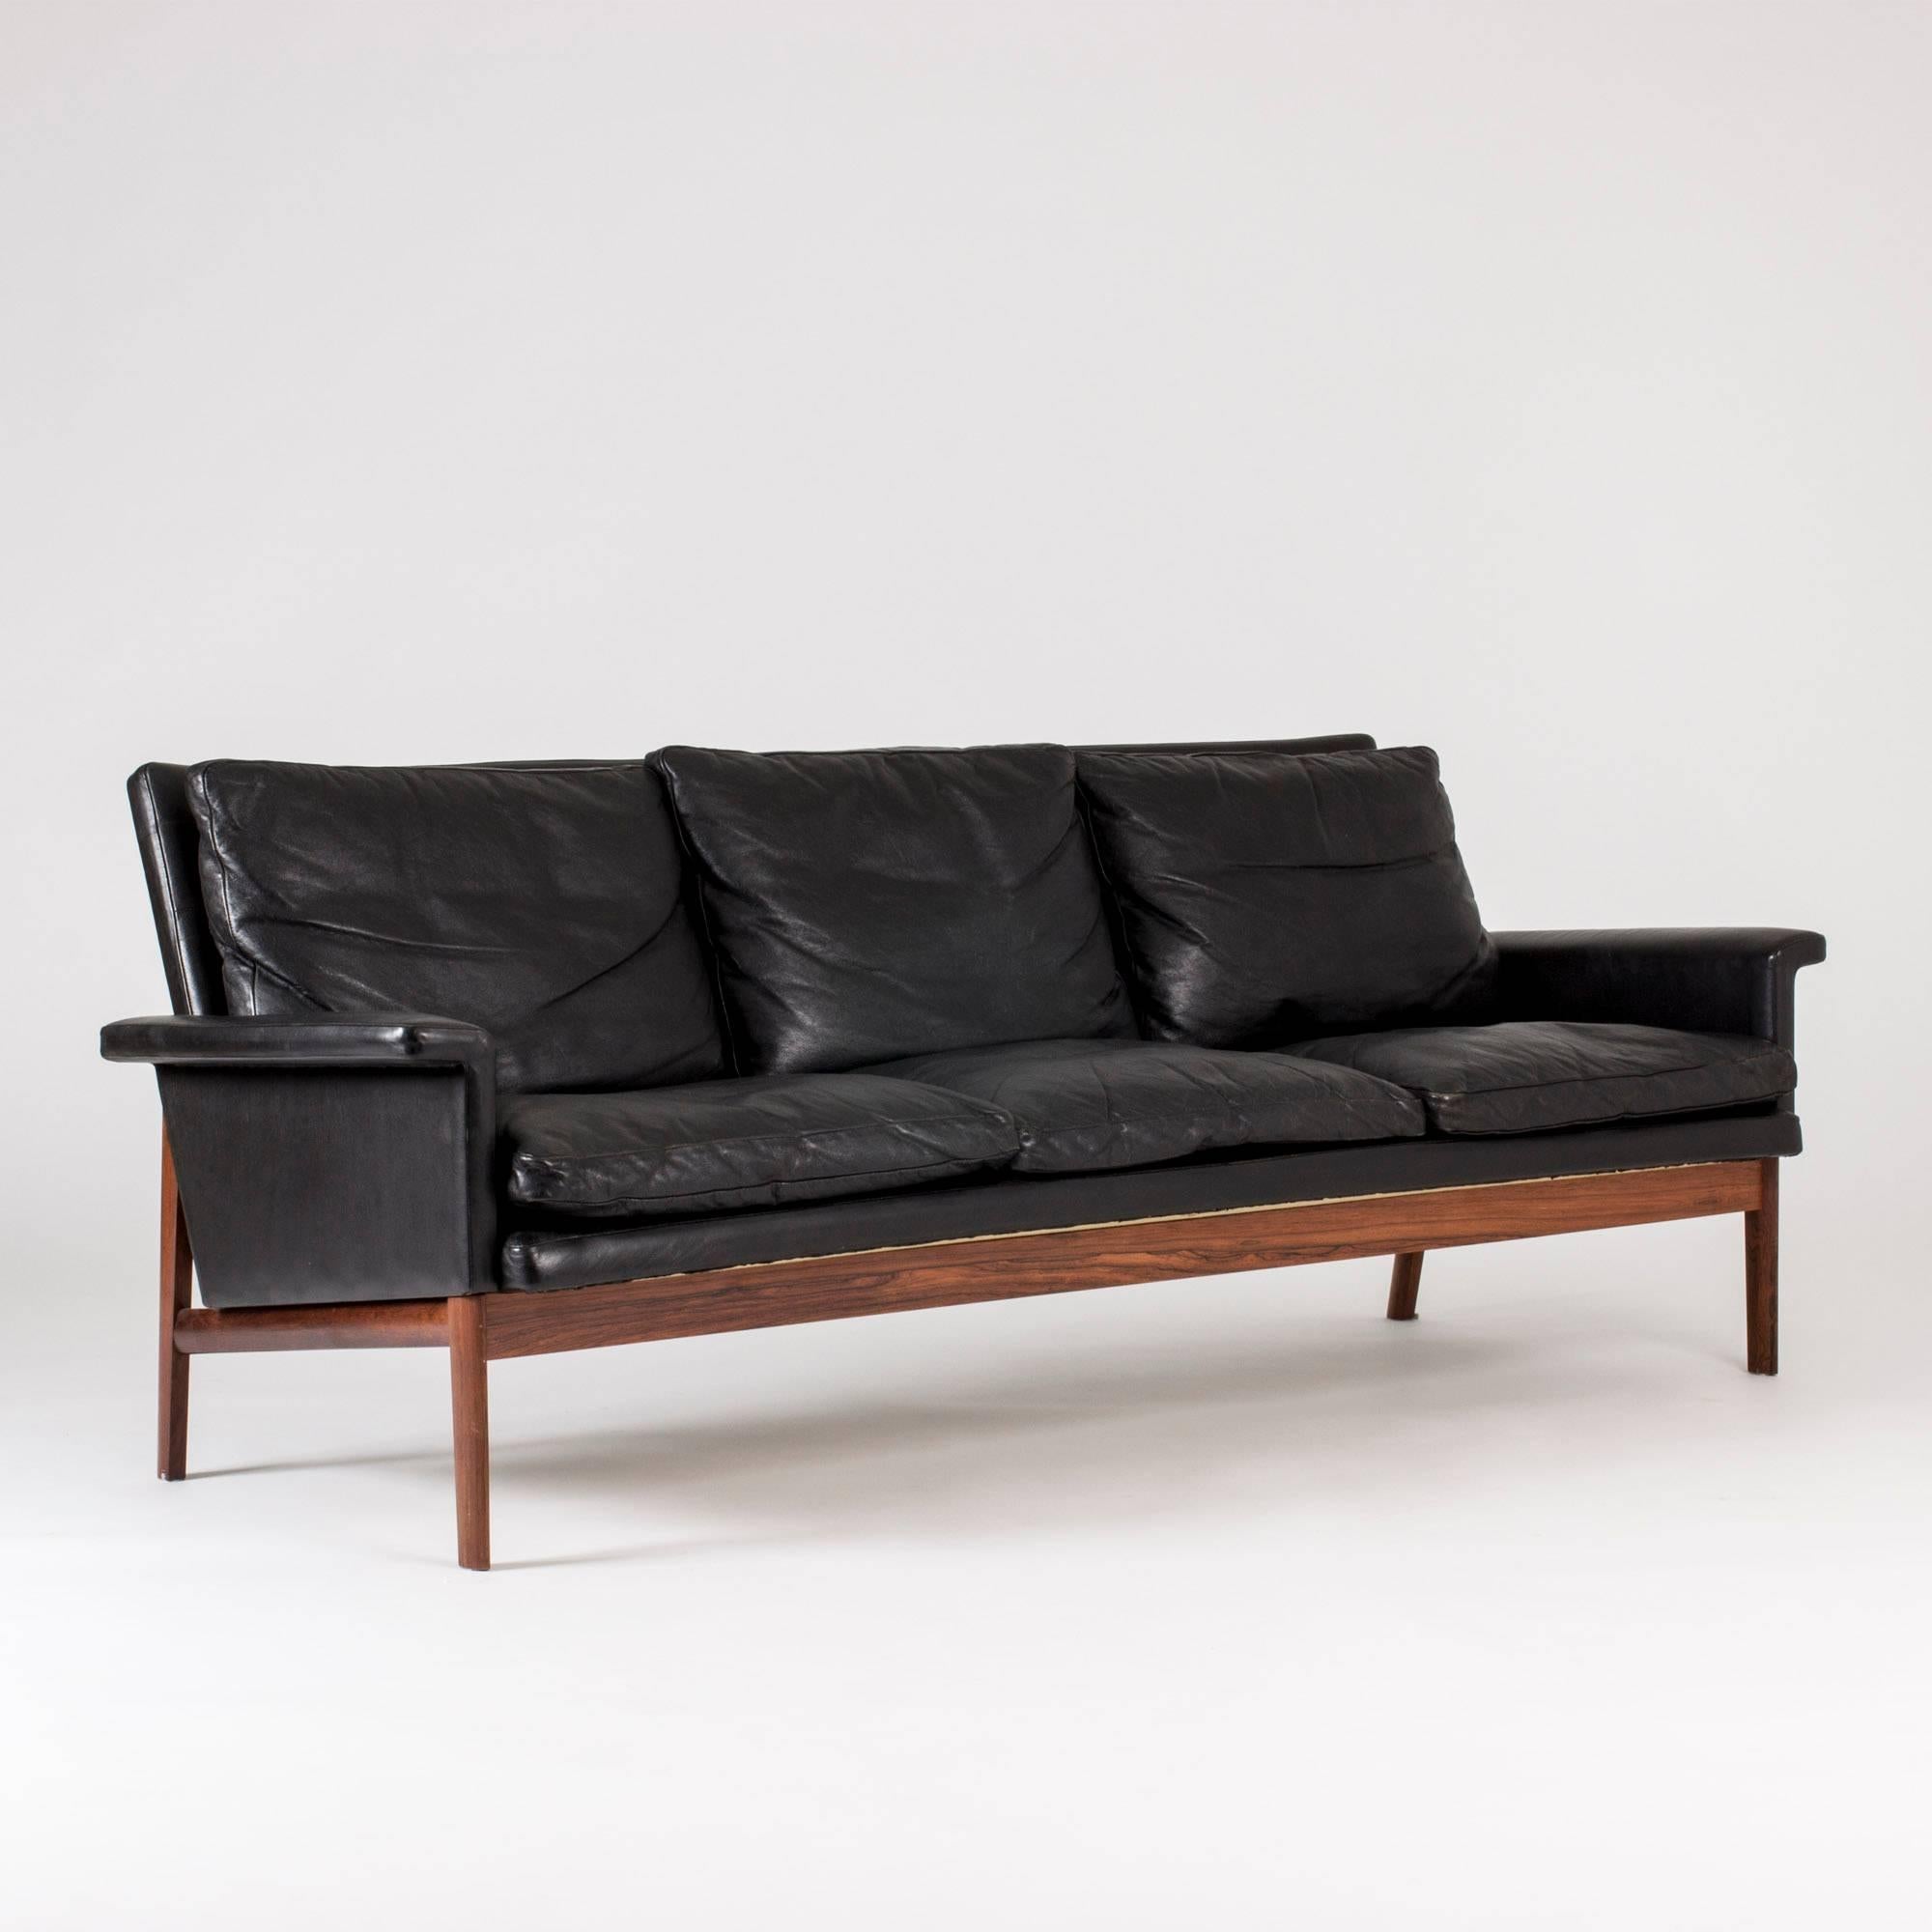 Black leather and rosewood three-seat “Jupiter” sofa by Finn Juhl. Nice lines and subtle details such as the ever so slightly curved backrest and elliptic legs that appear wide or slender depending on angle. Leather in very good condition.